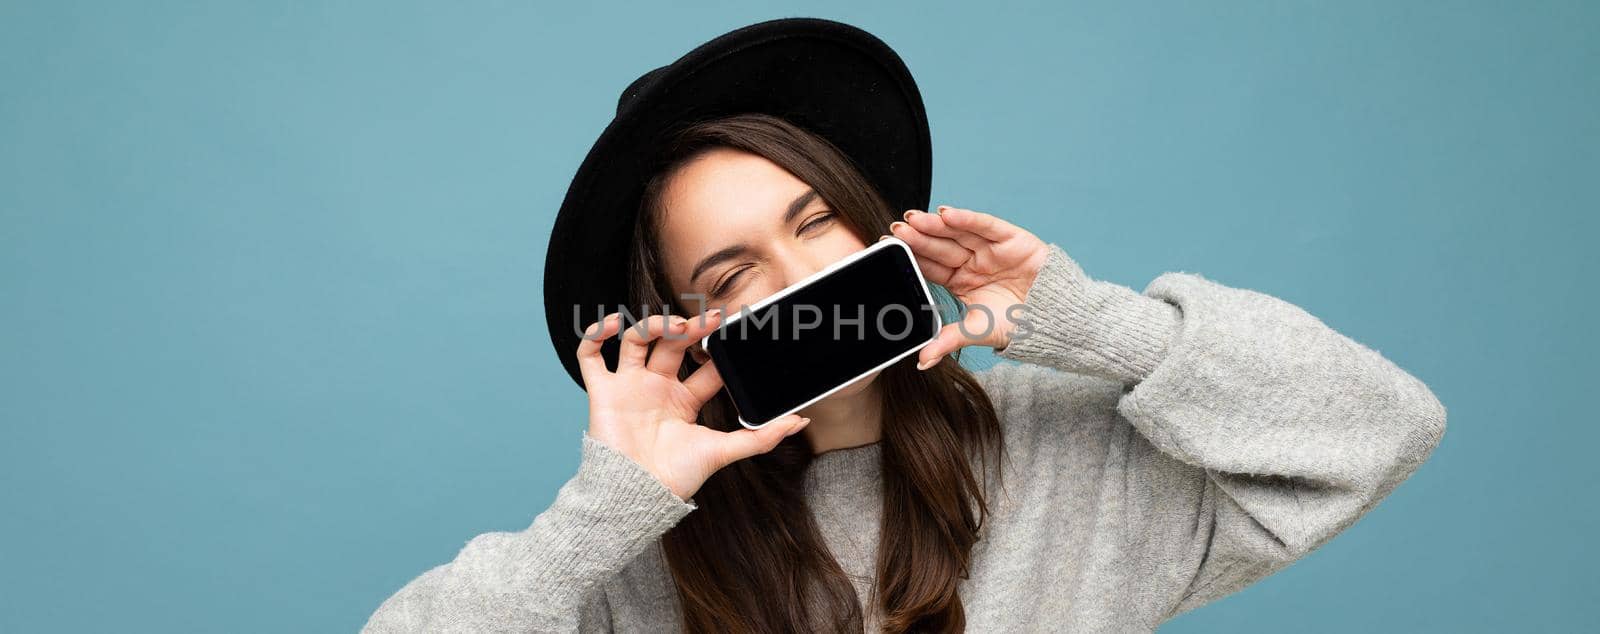 panoramic Photo of Beautiful positive woman person wearing black hat and grey sweater holding mobilephone showing smartphone isolated on background with fantastic eyes.Mock up, cutout, free space